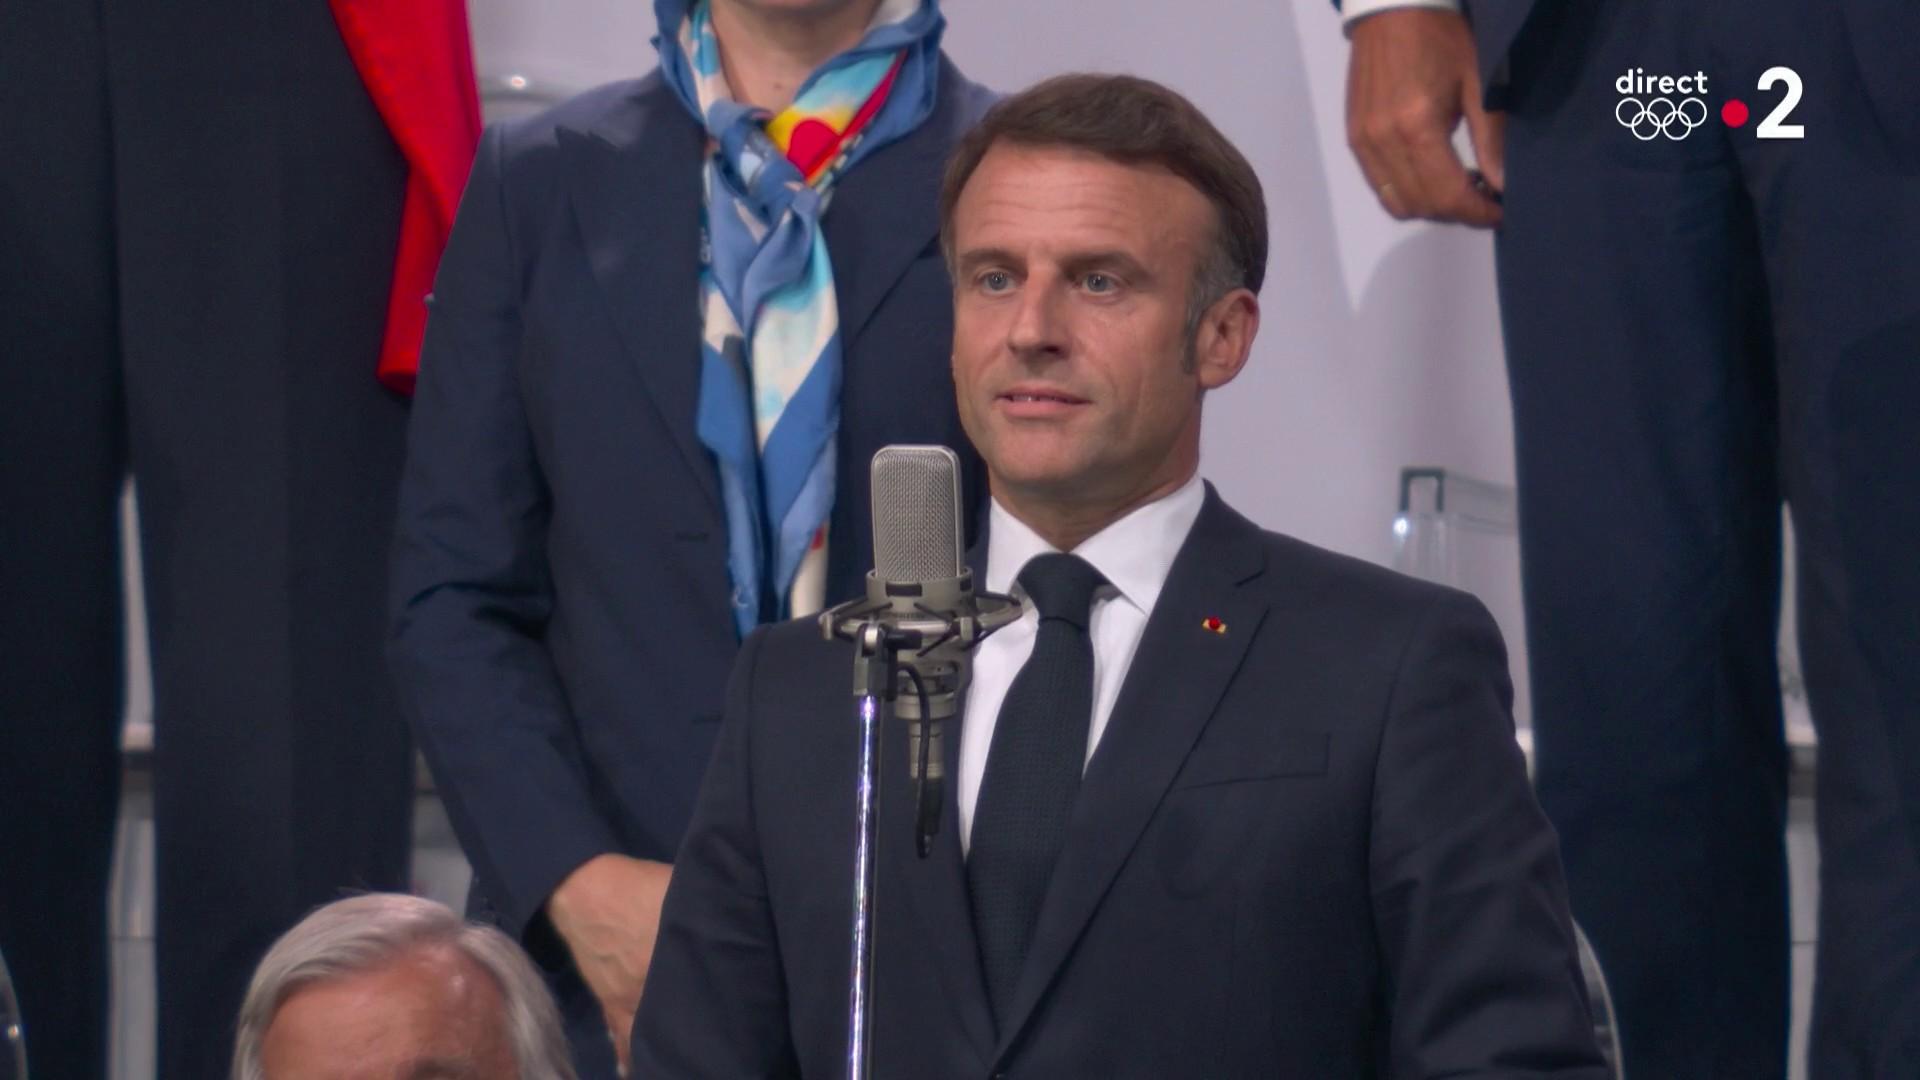 Emmanuel Macron's speech at the opening ceremony of the Olympic Games in Paris, July 26, 2024.